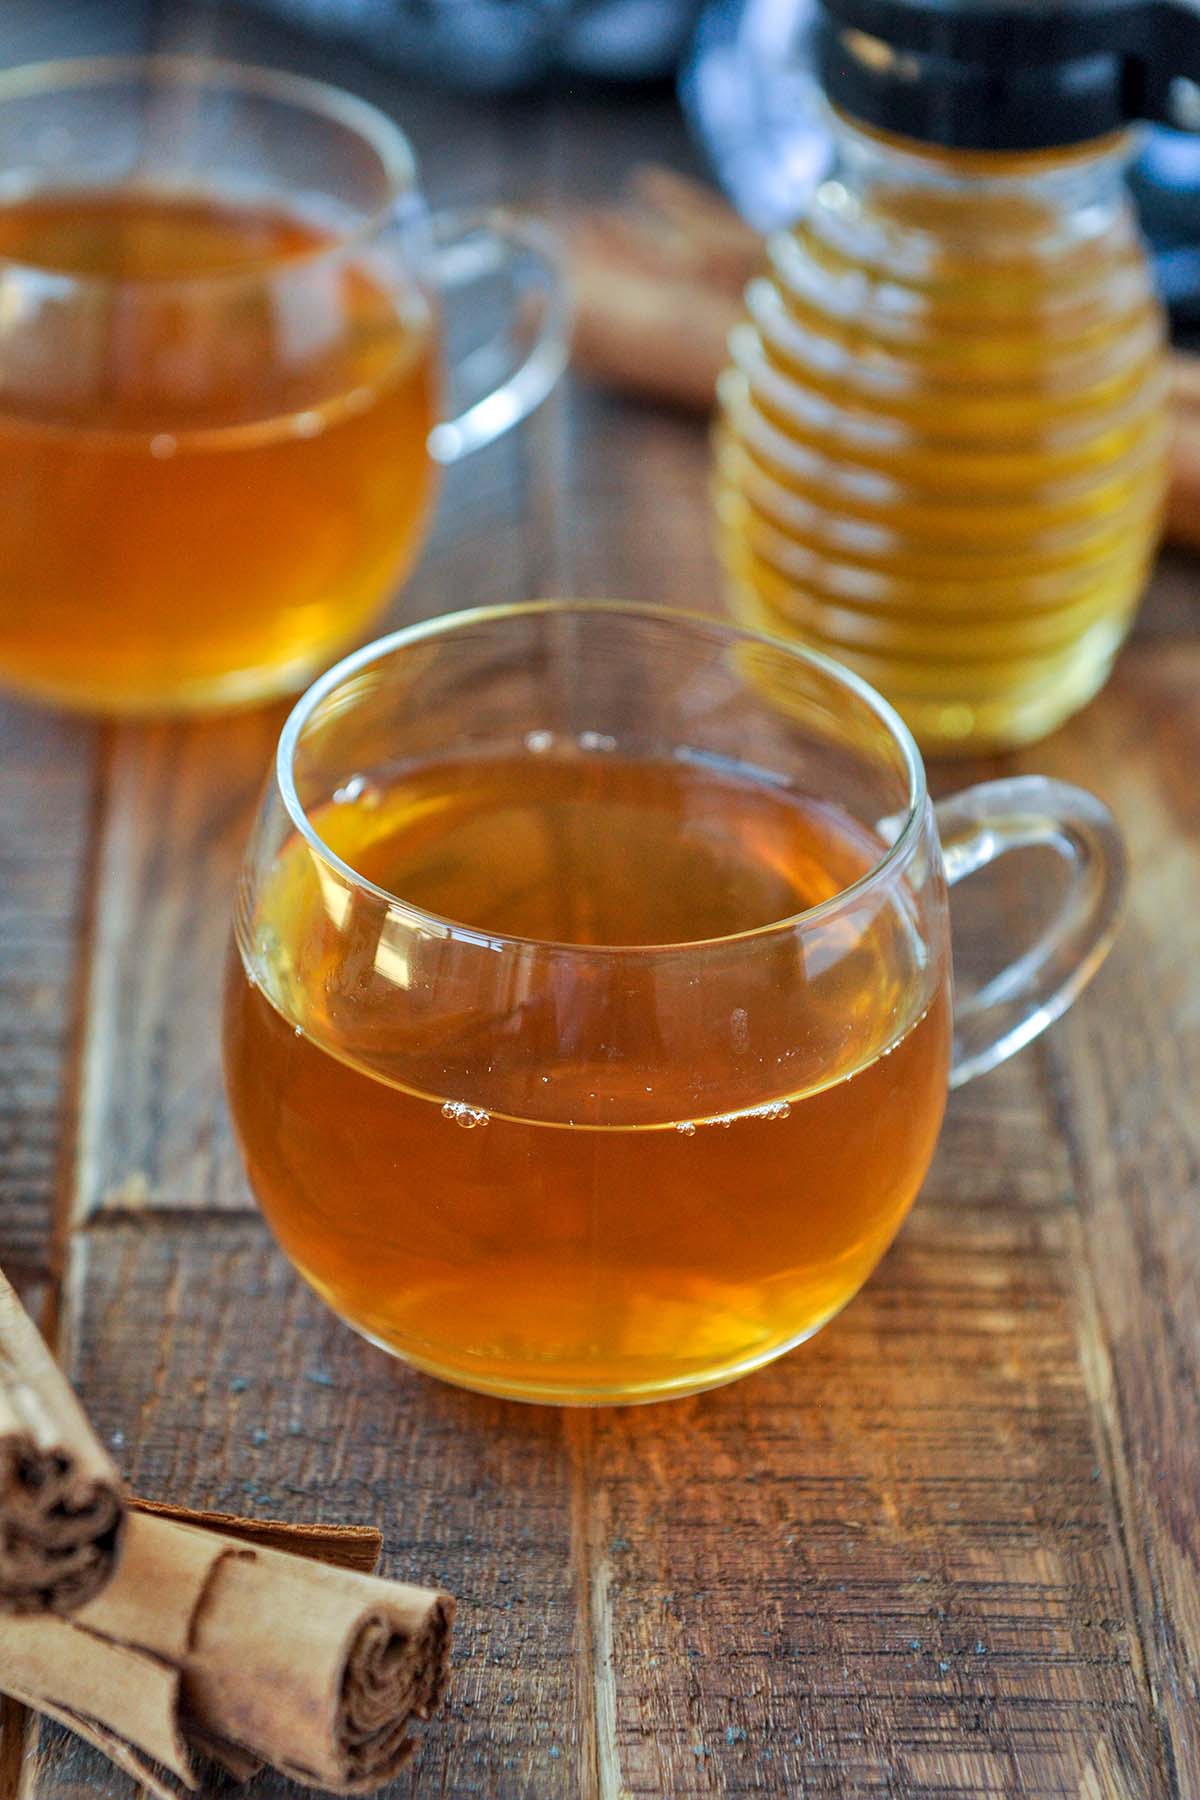 An up close of glass mugs of tea and a jar of honey in the background.